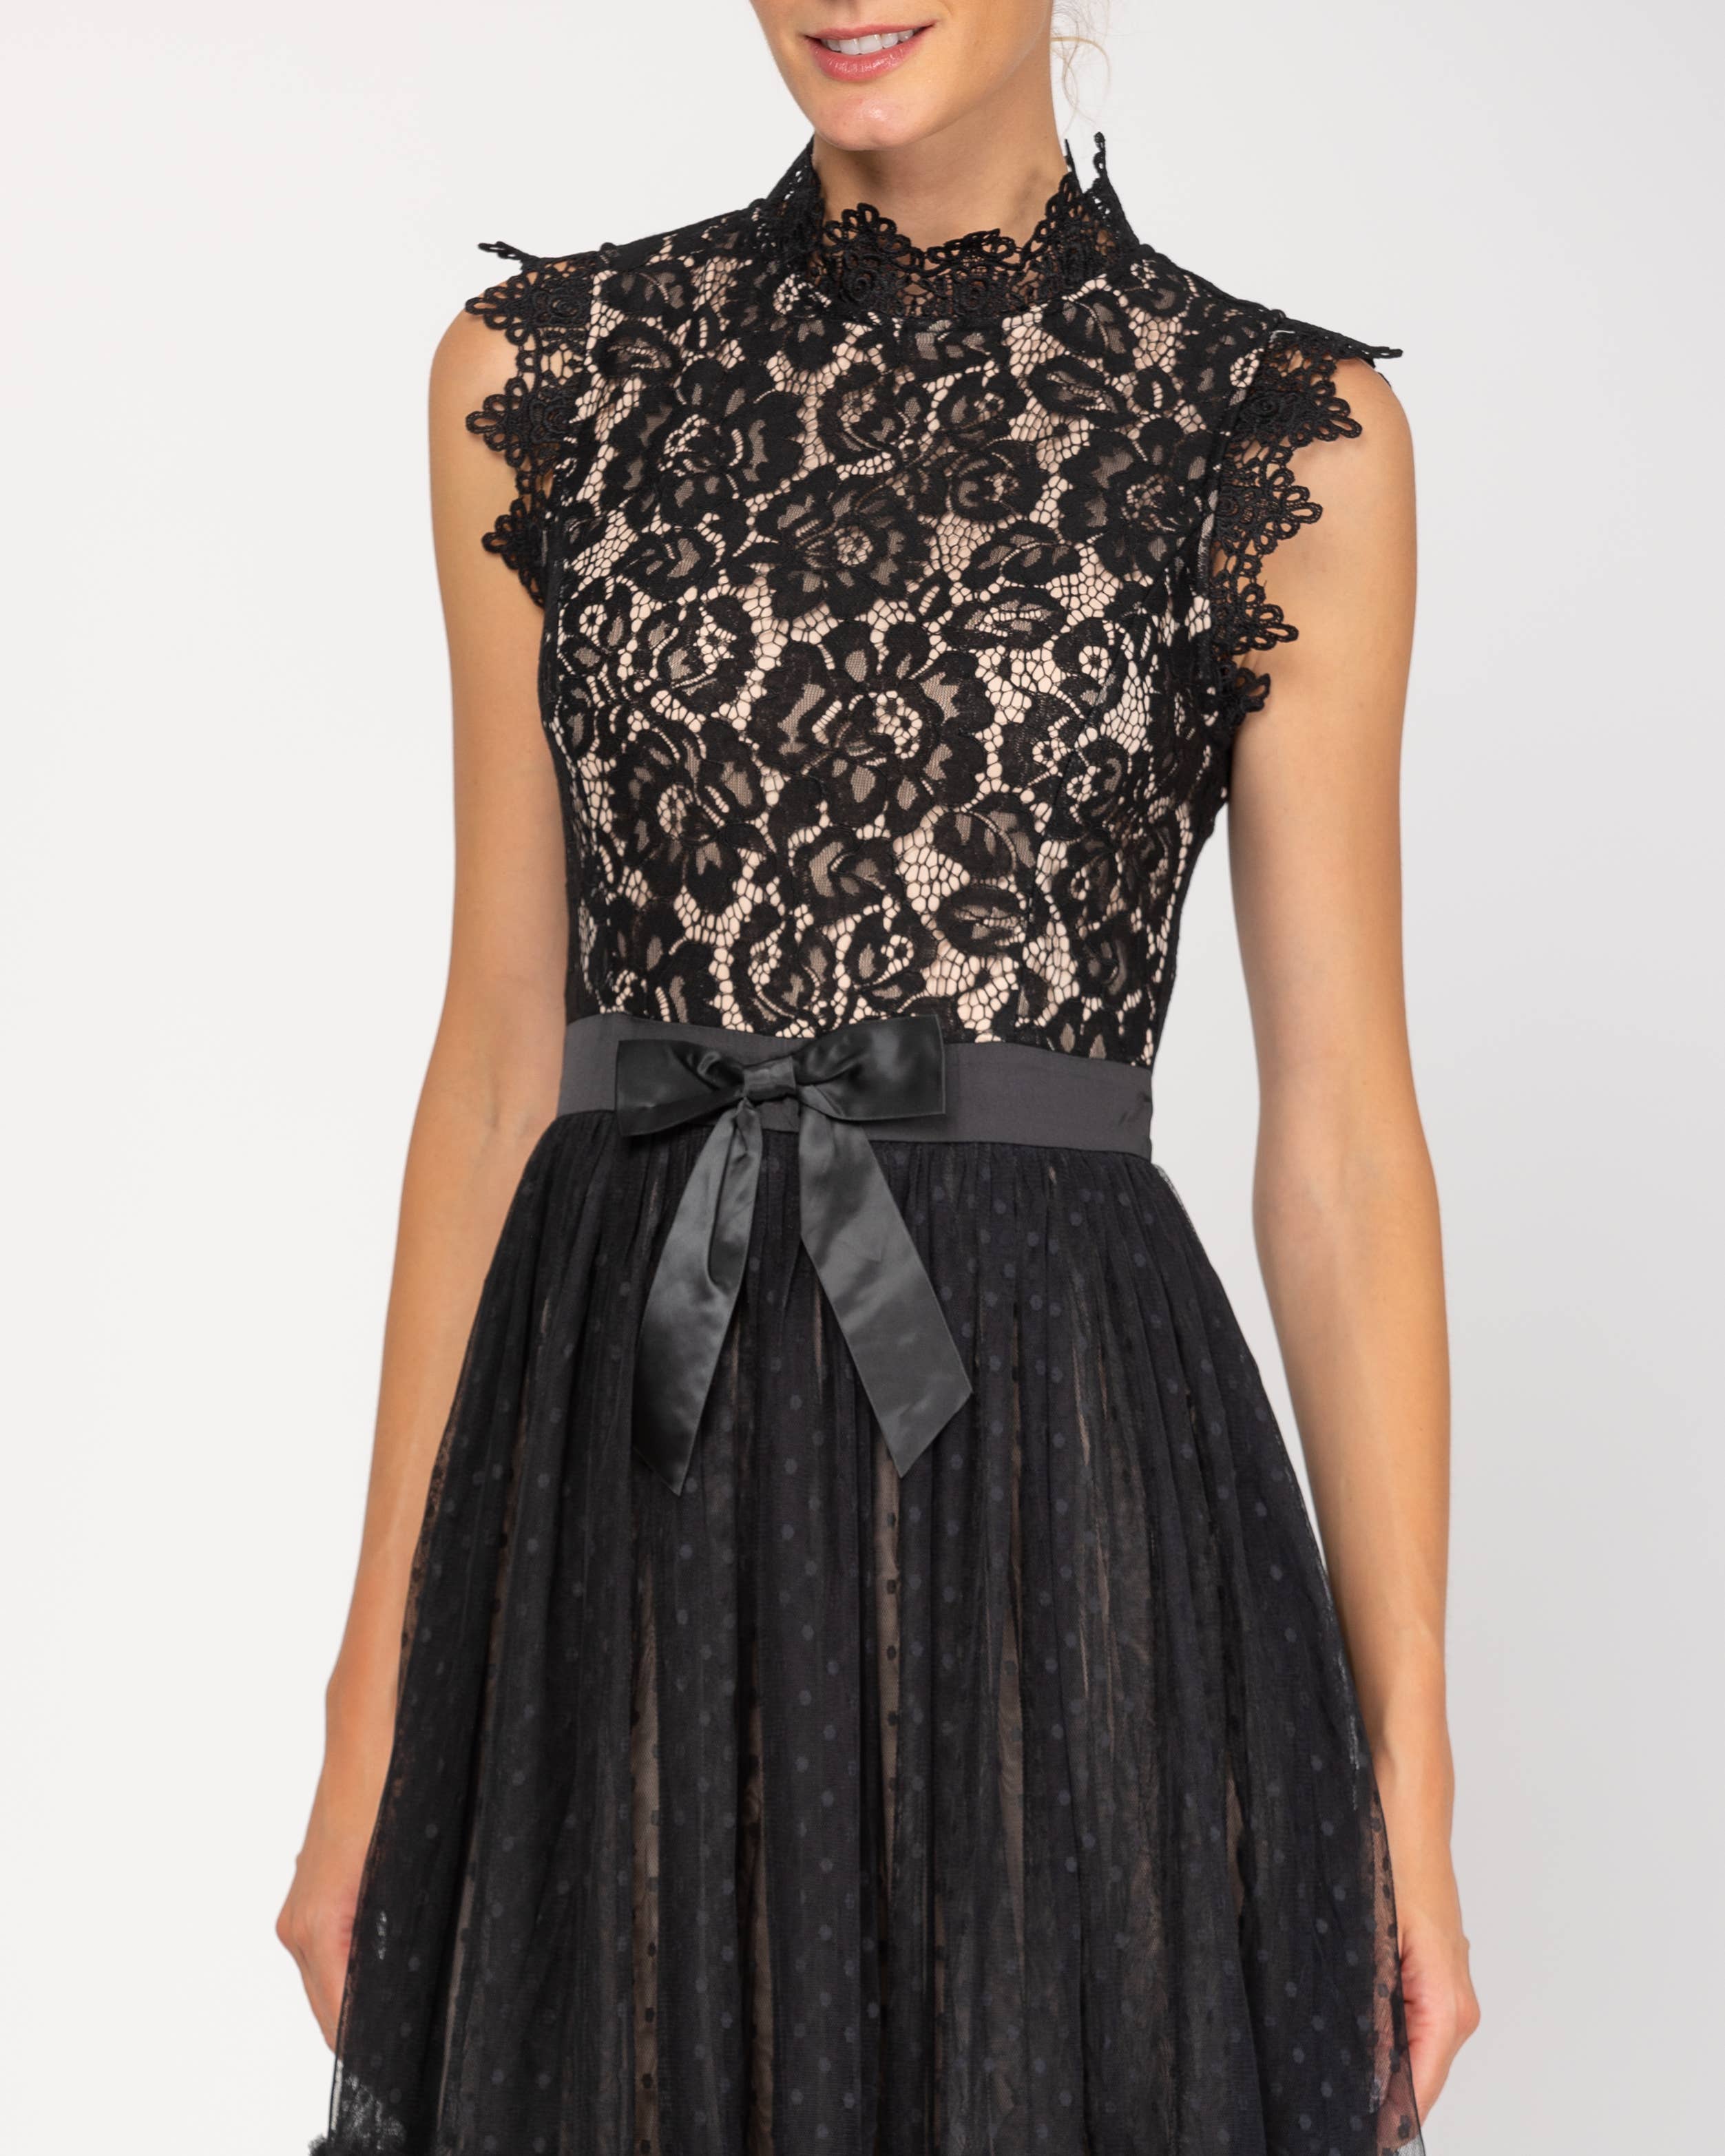 Women's Midi Lace Dress with Polka Tulle Skirt